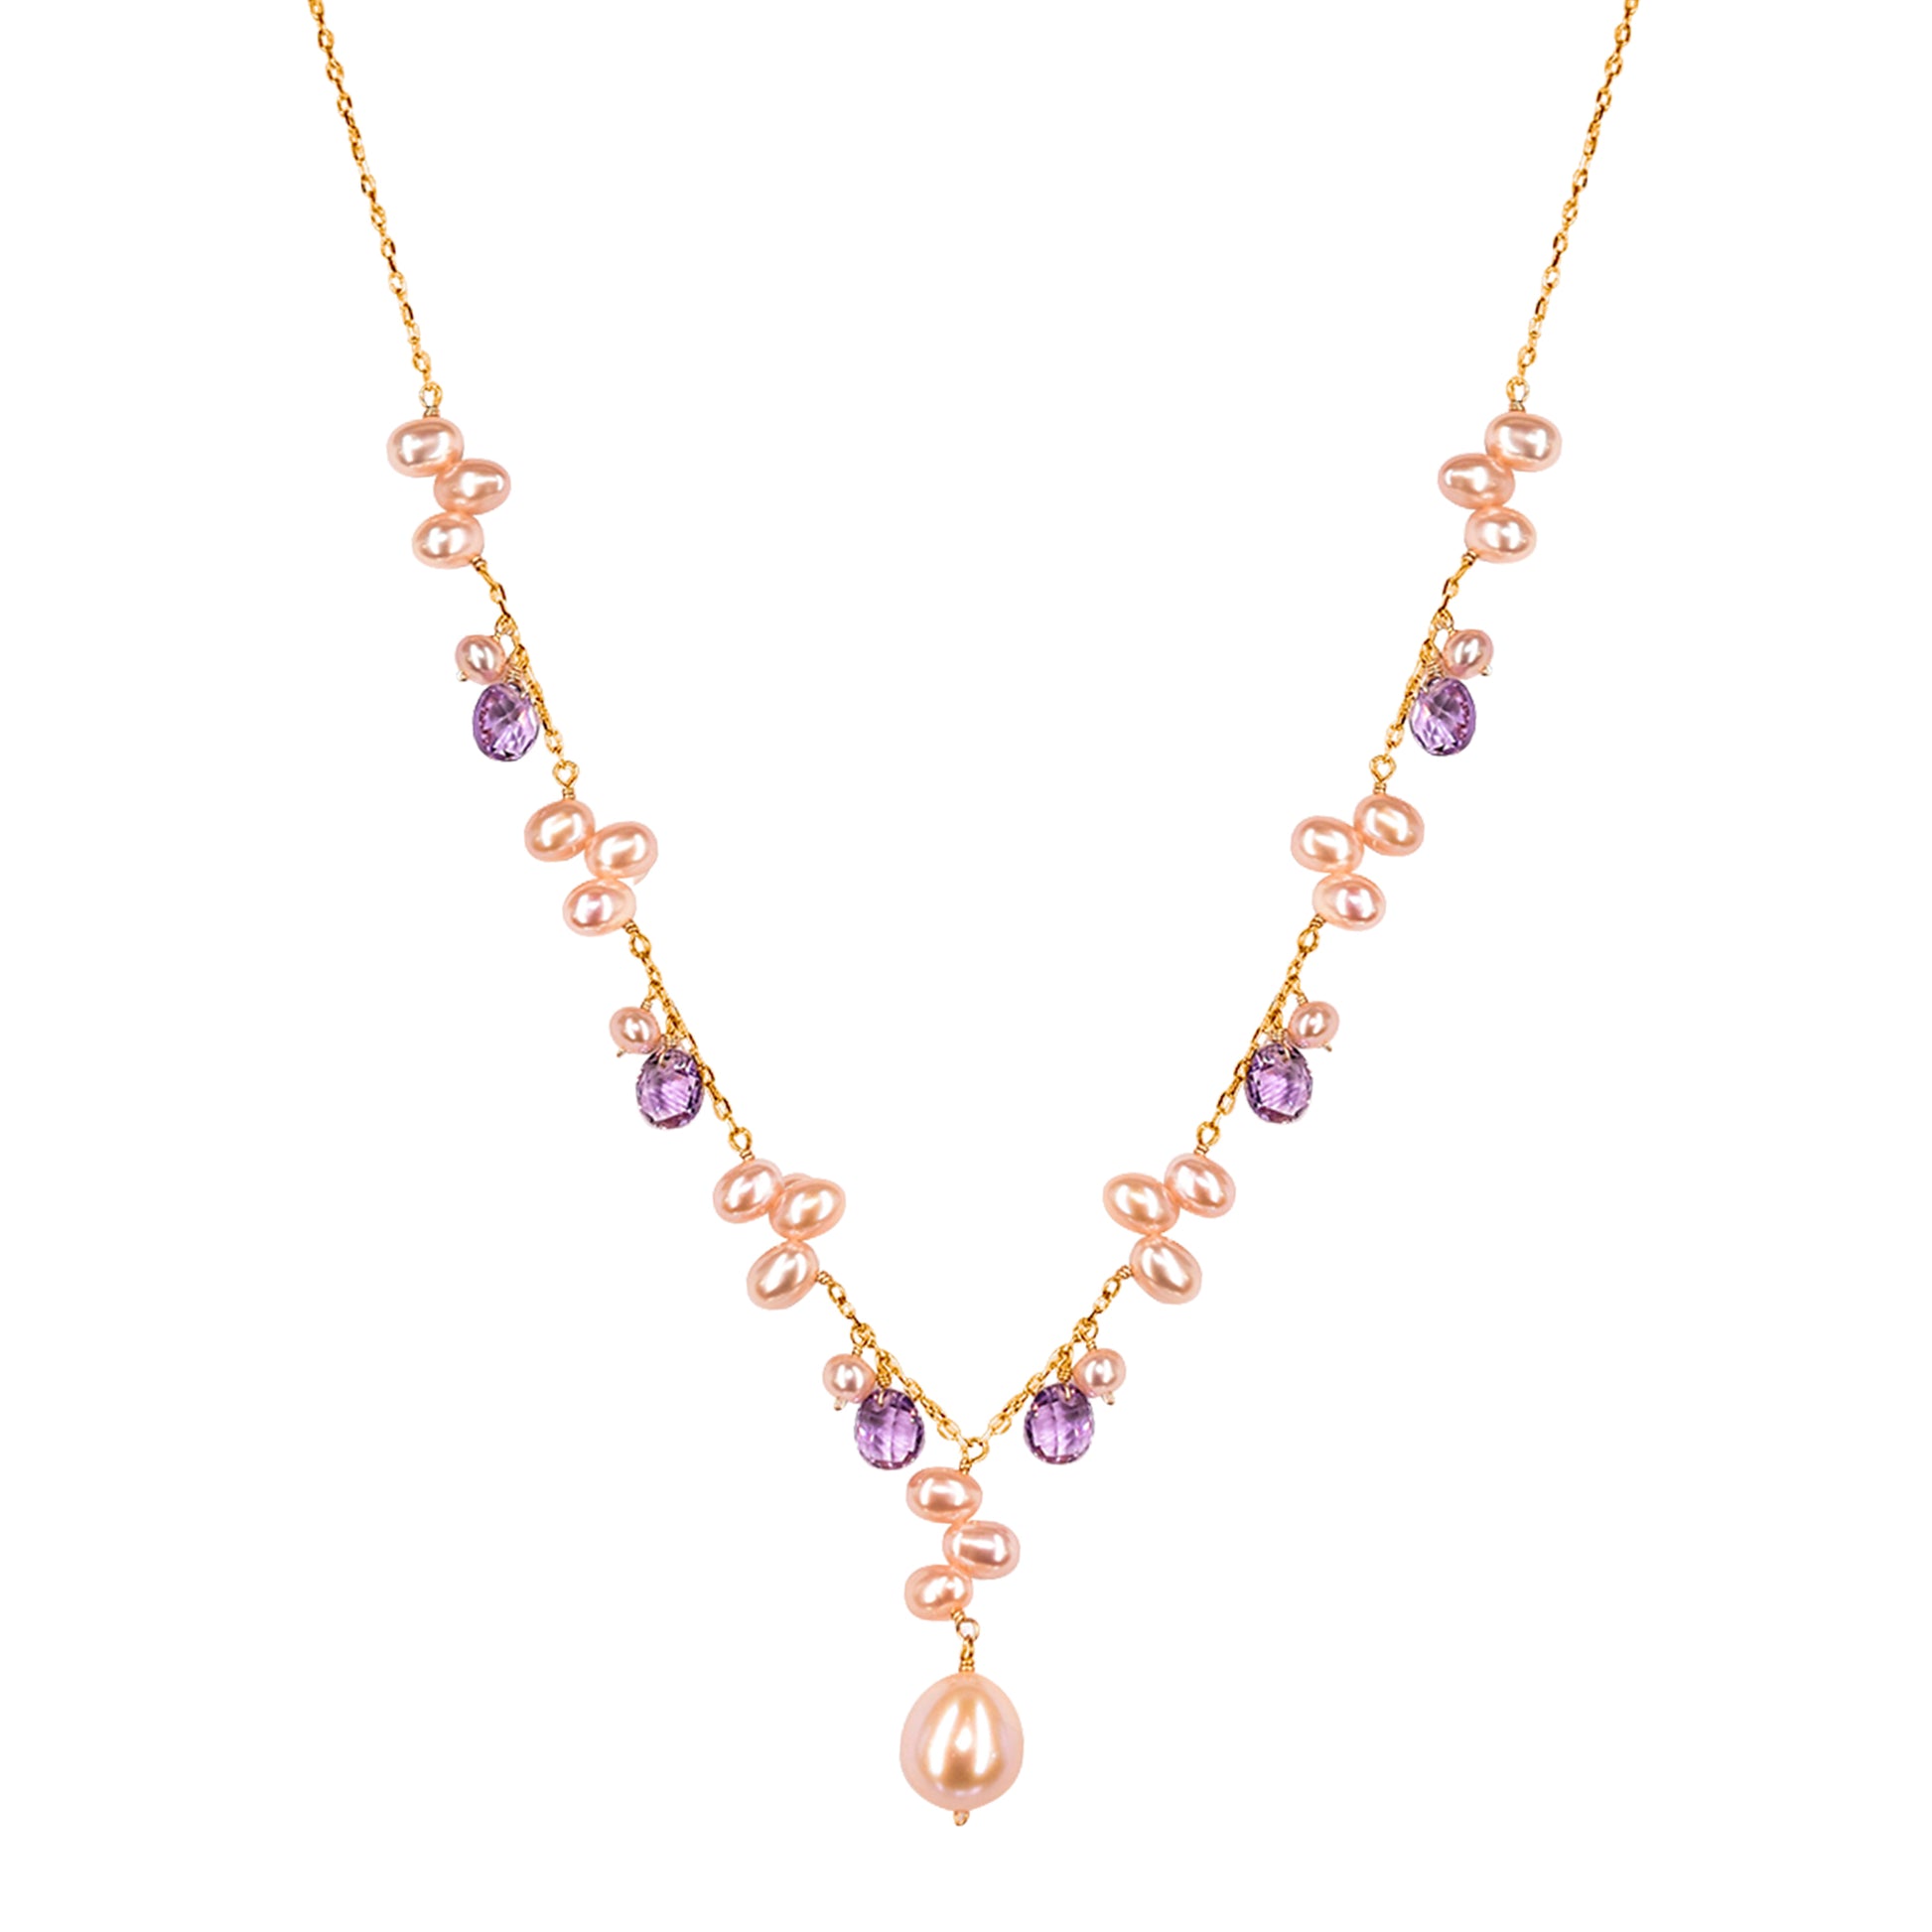 14k Pink Freshwater Pearl Amethyst Necklace 18"